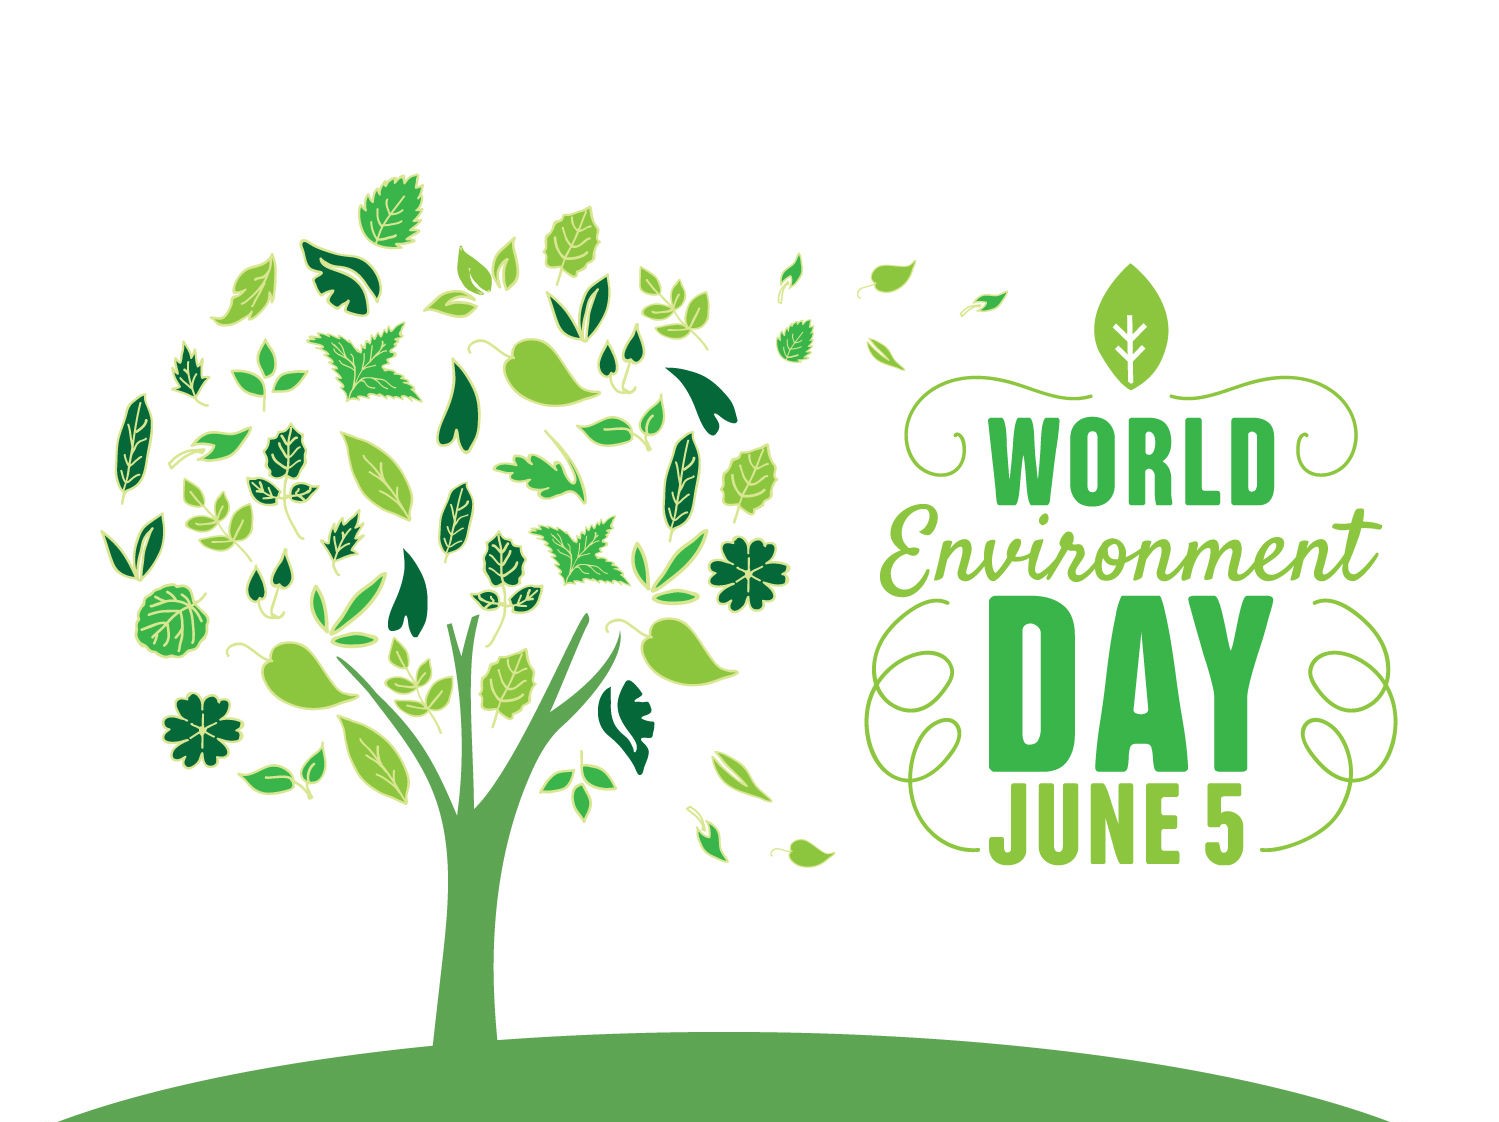 World Environment Day HD Pictures 2019 And HD Wallpapers For WhatsApp,  Twitter, And Facebook